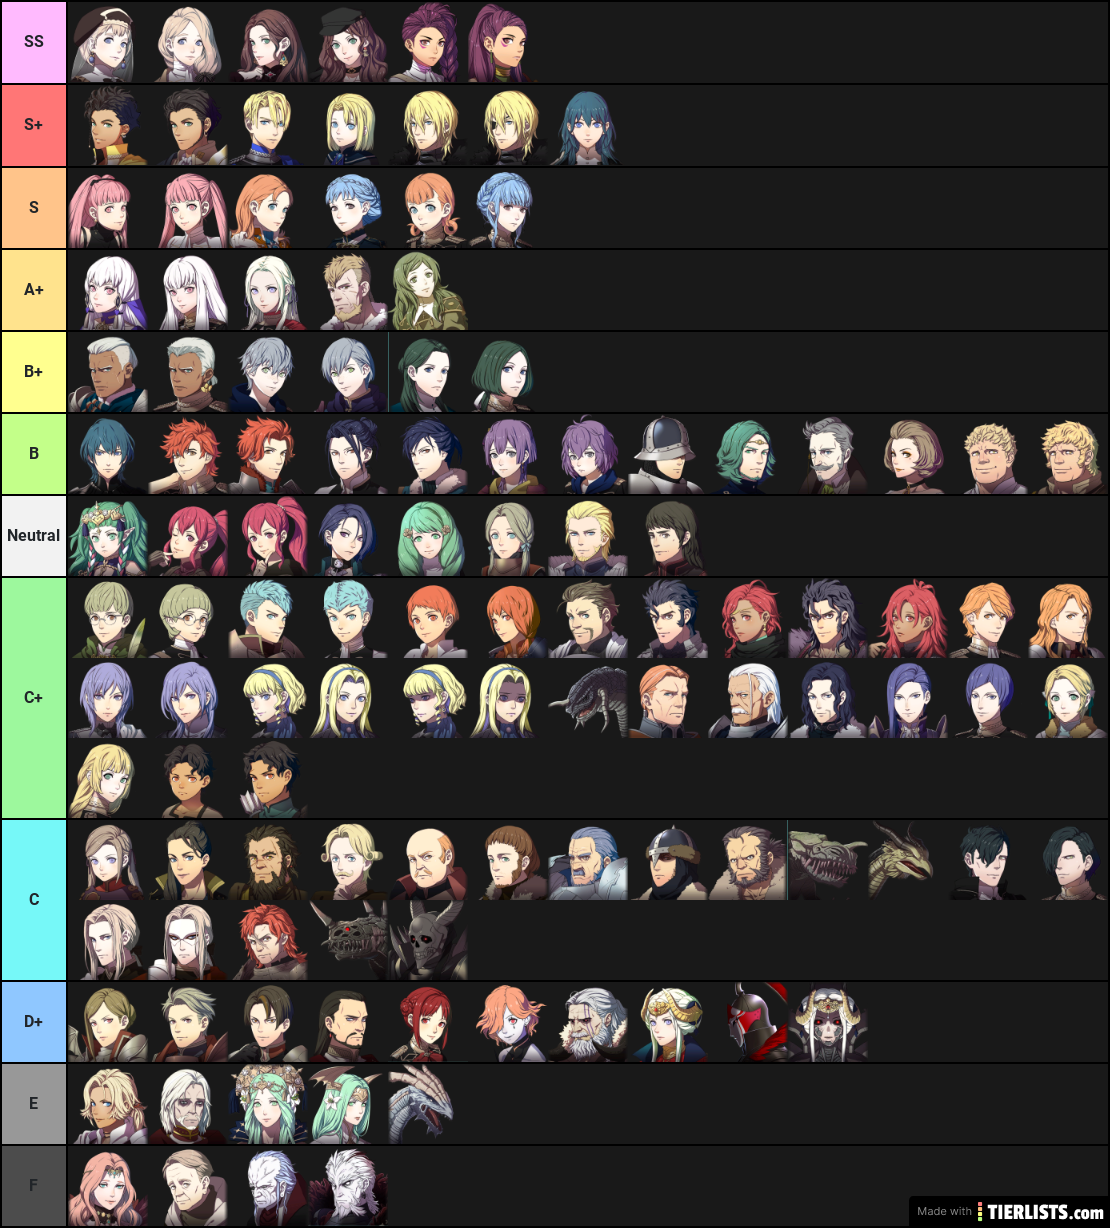 The Ultimate Three Houses Tier List: In my opinion